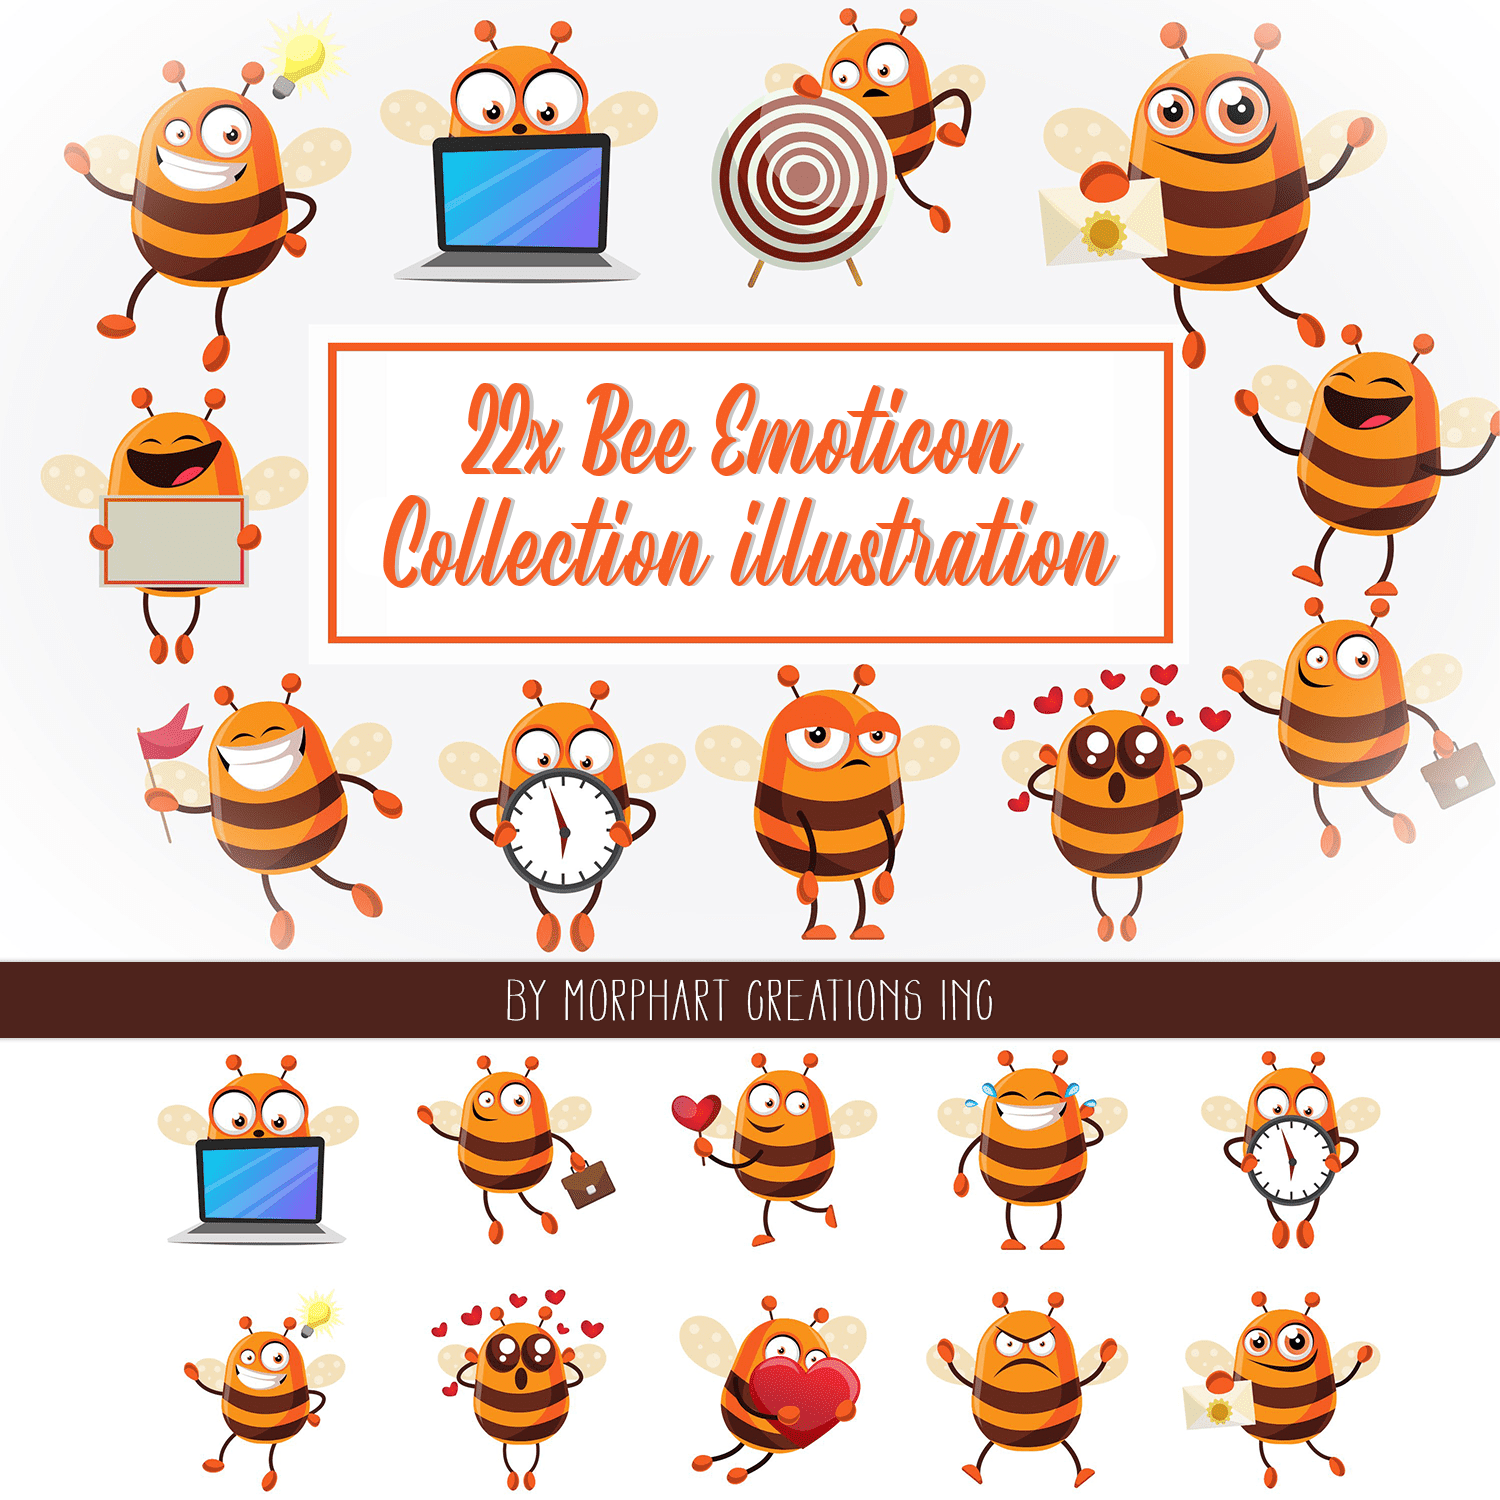 Bundle with irresistible images of bees emoticons.